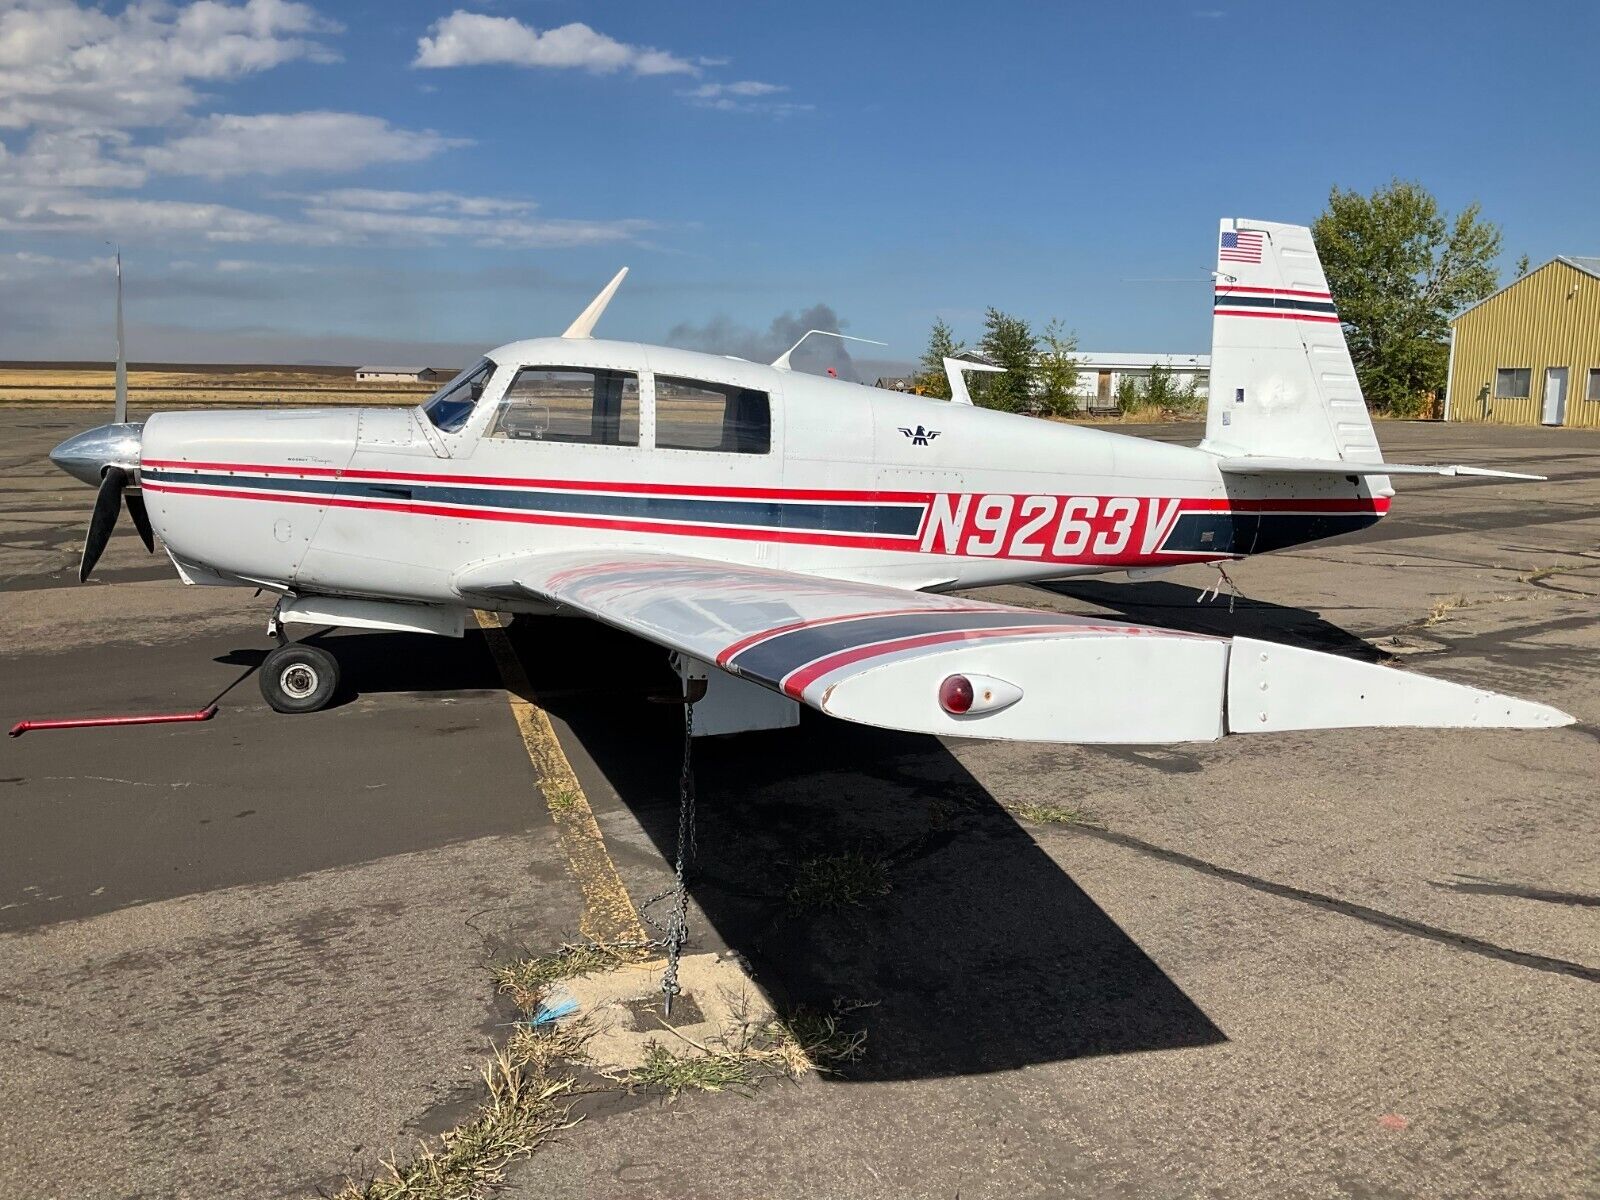 Single Engine Airplanes: Mooney M20C four person aircraft